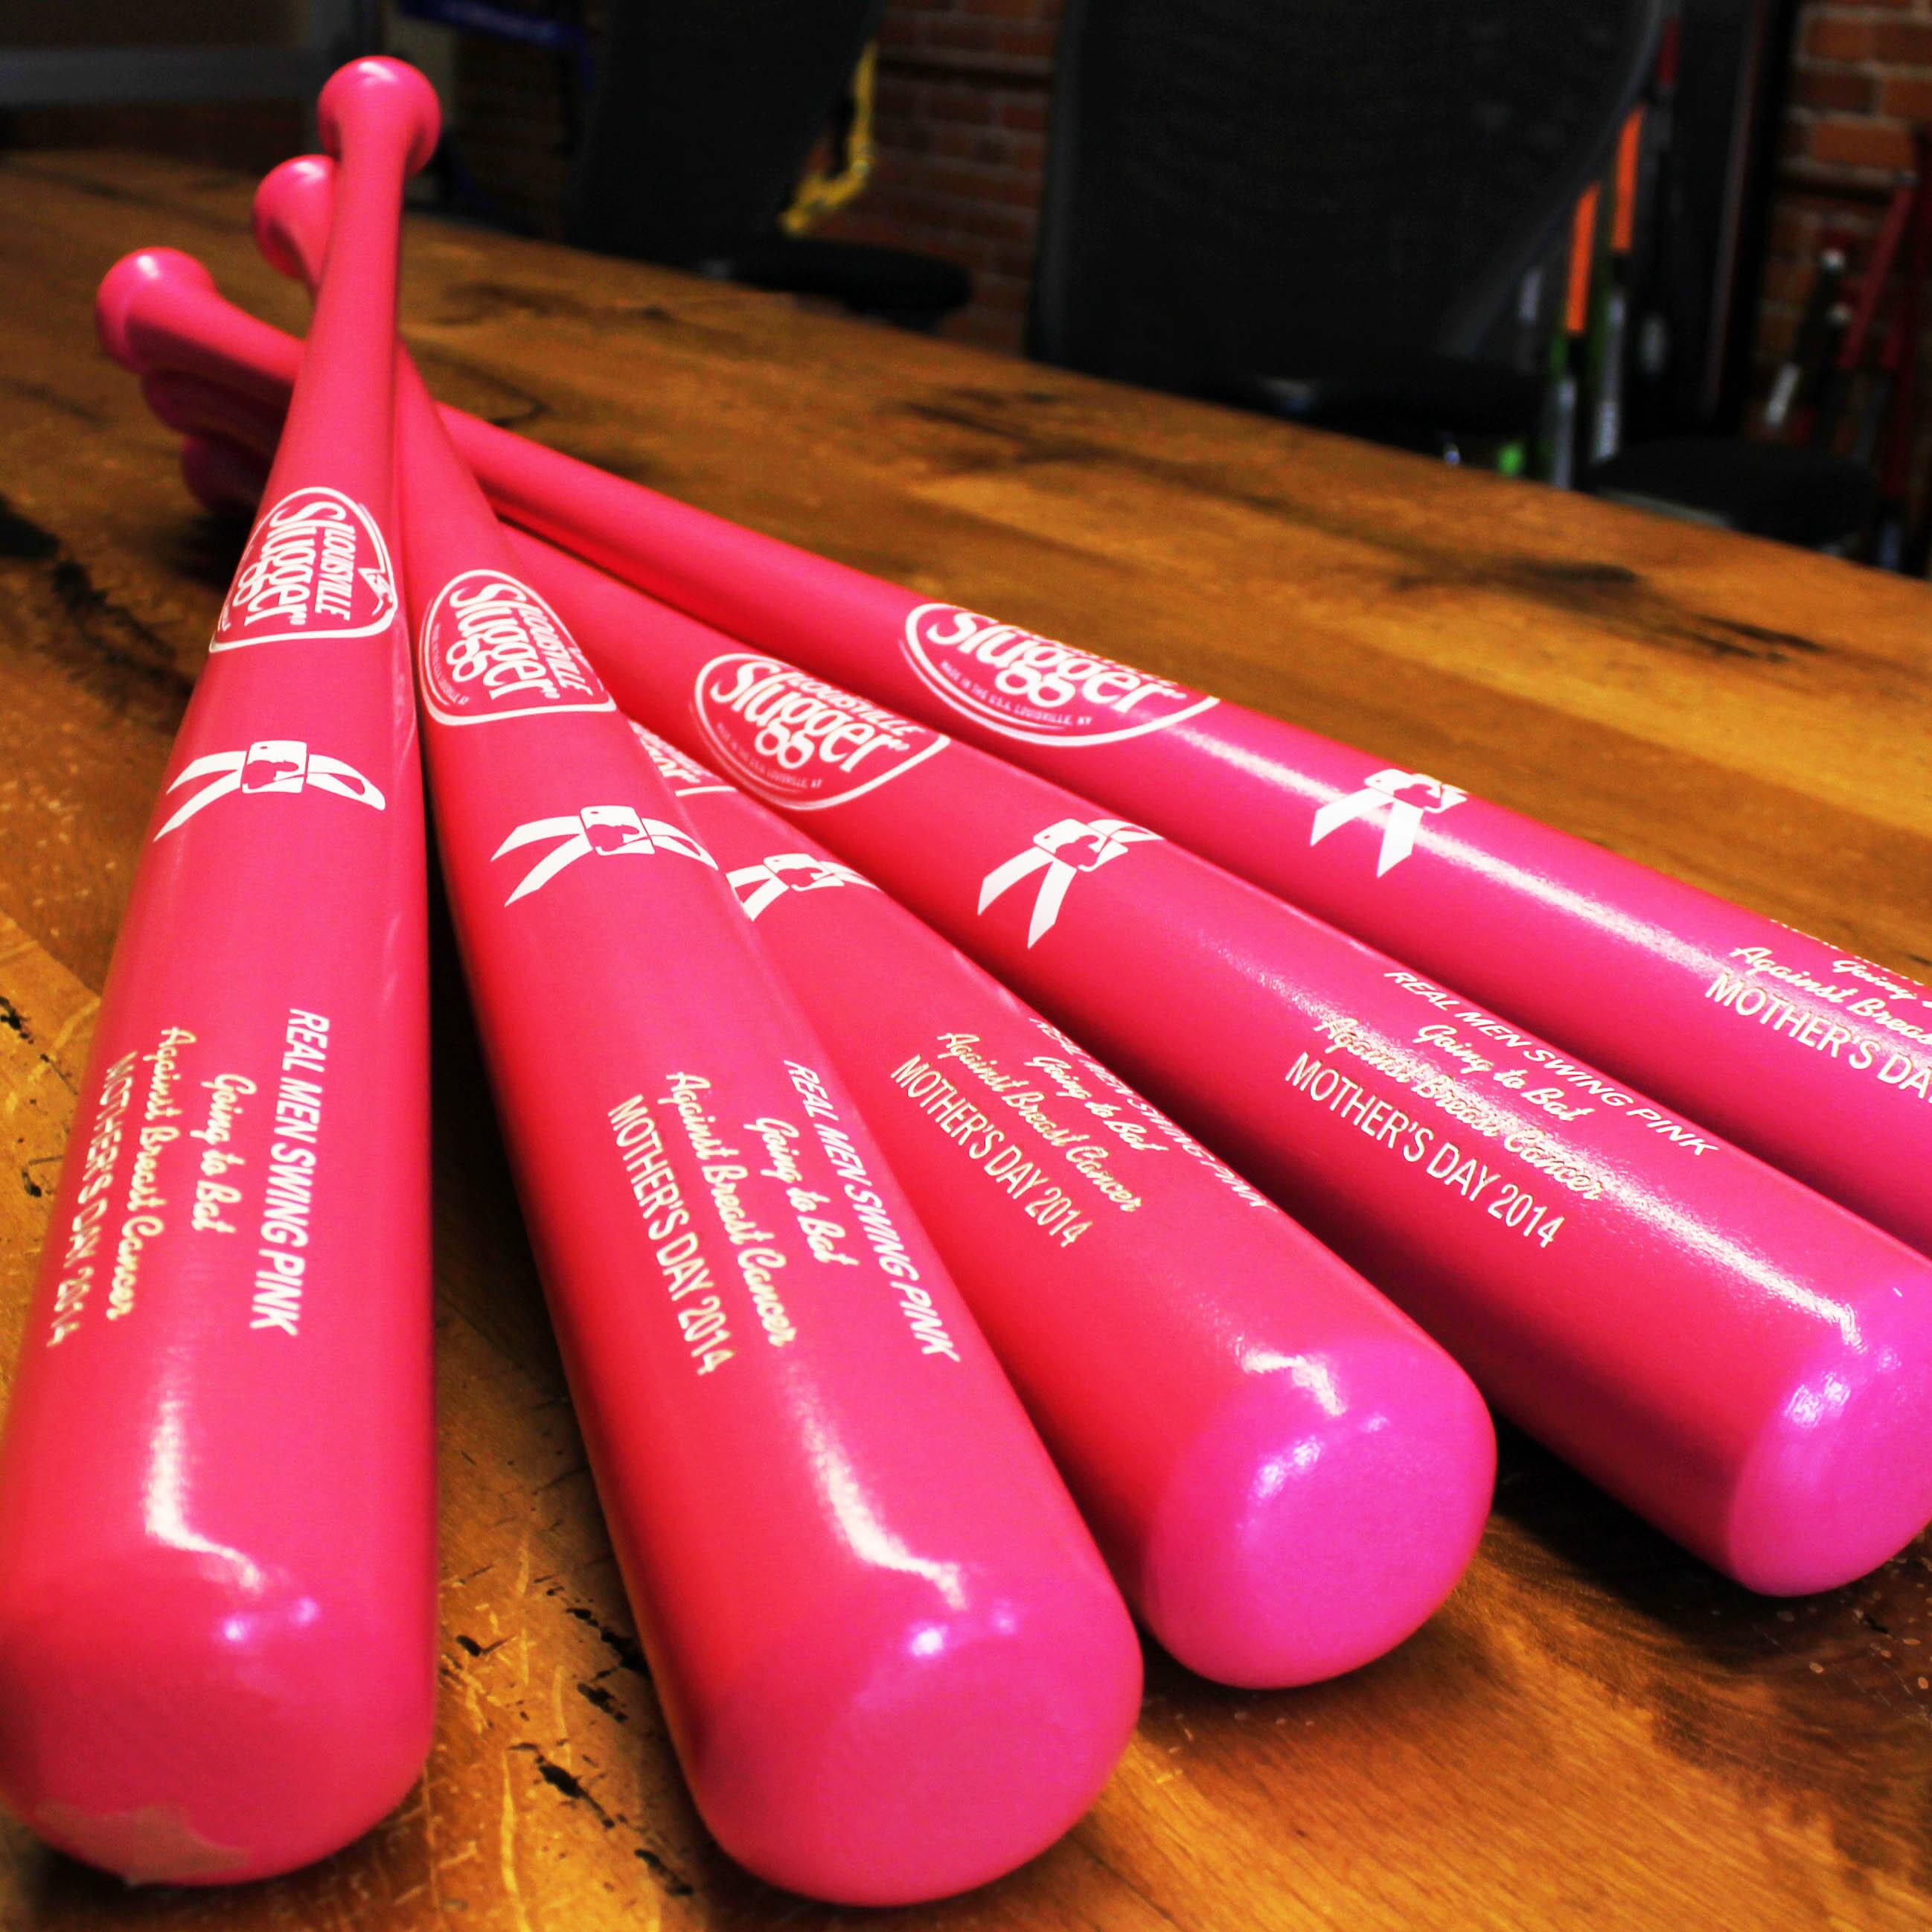 Gallery, The 2014 pink bats from Louisville Slugger